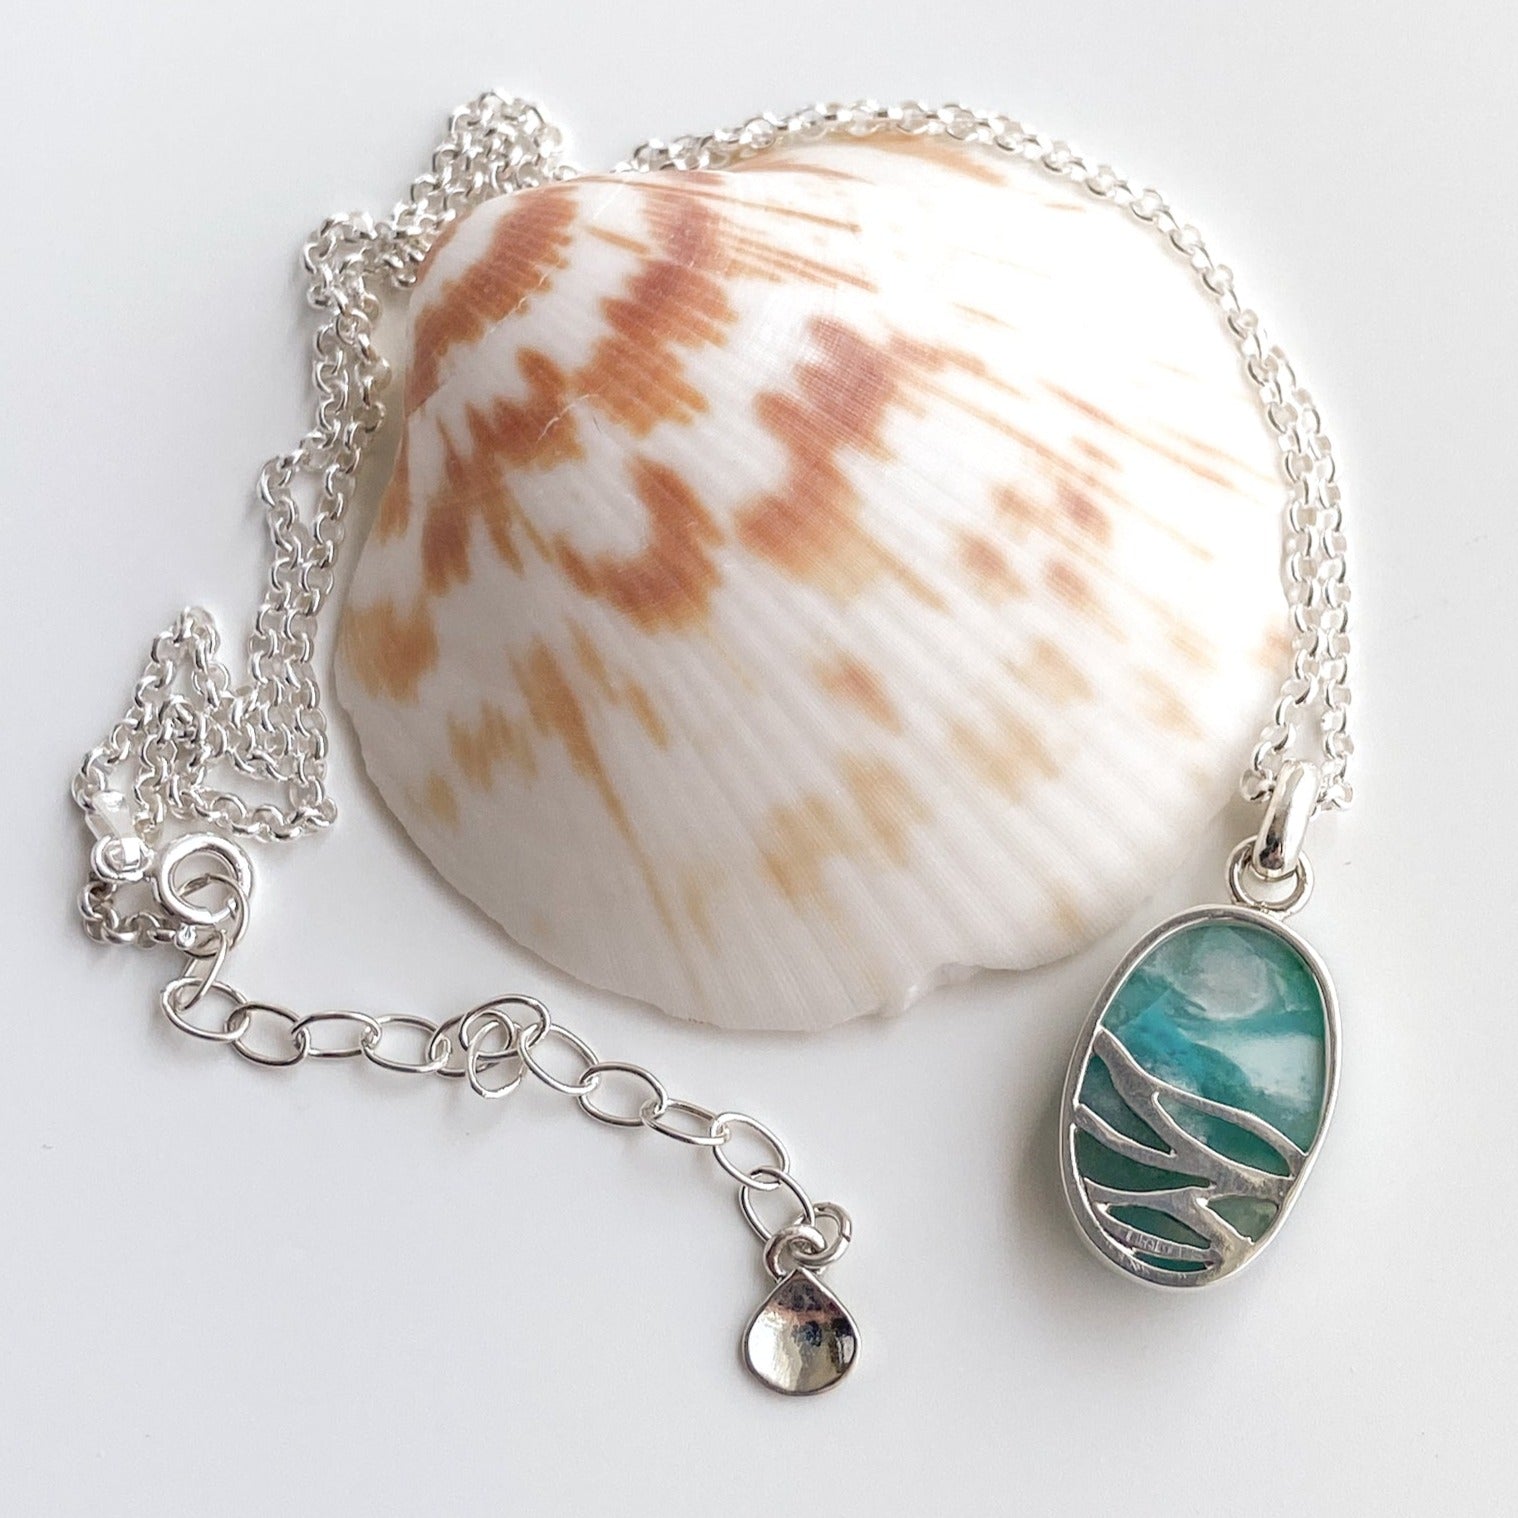 Reverse side view of the ocean blue opalized wood and silver pendant draped around a scallop shell on a white background.